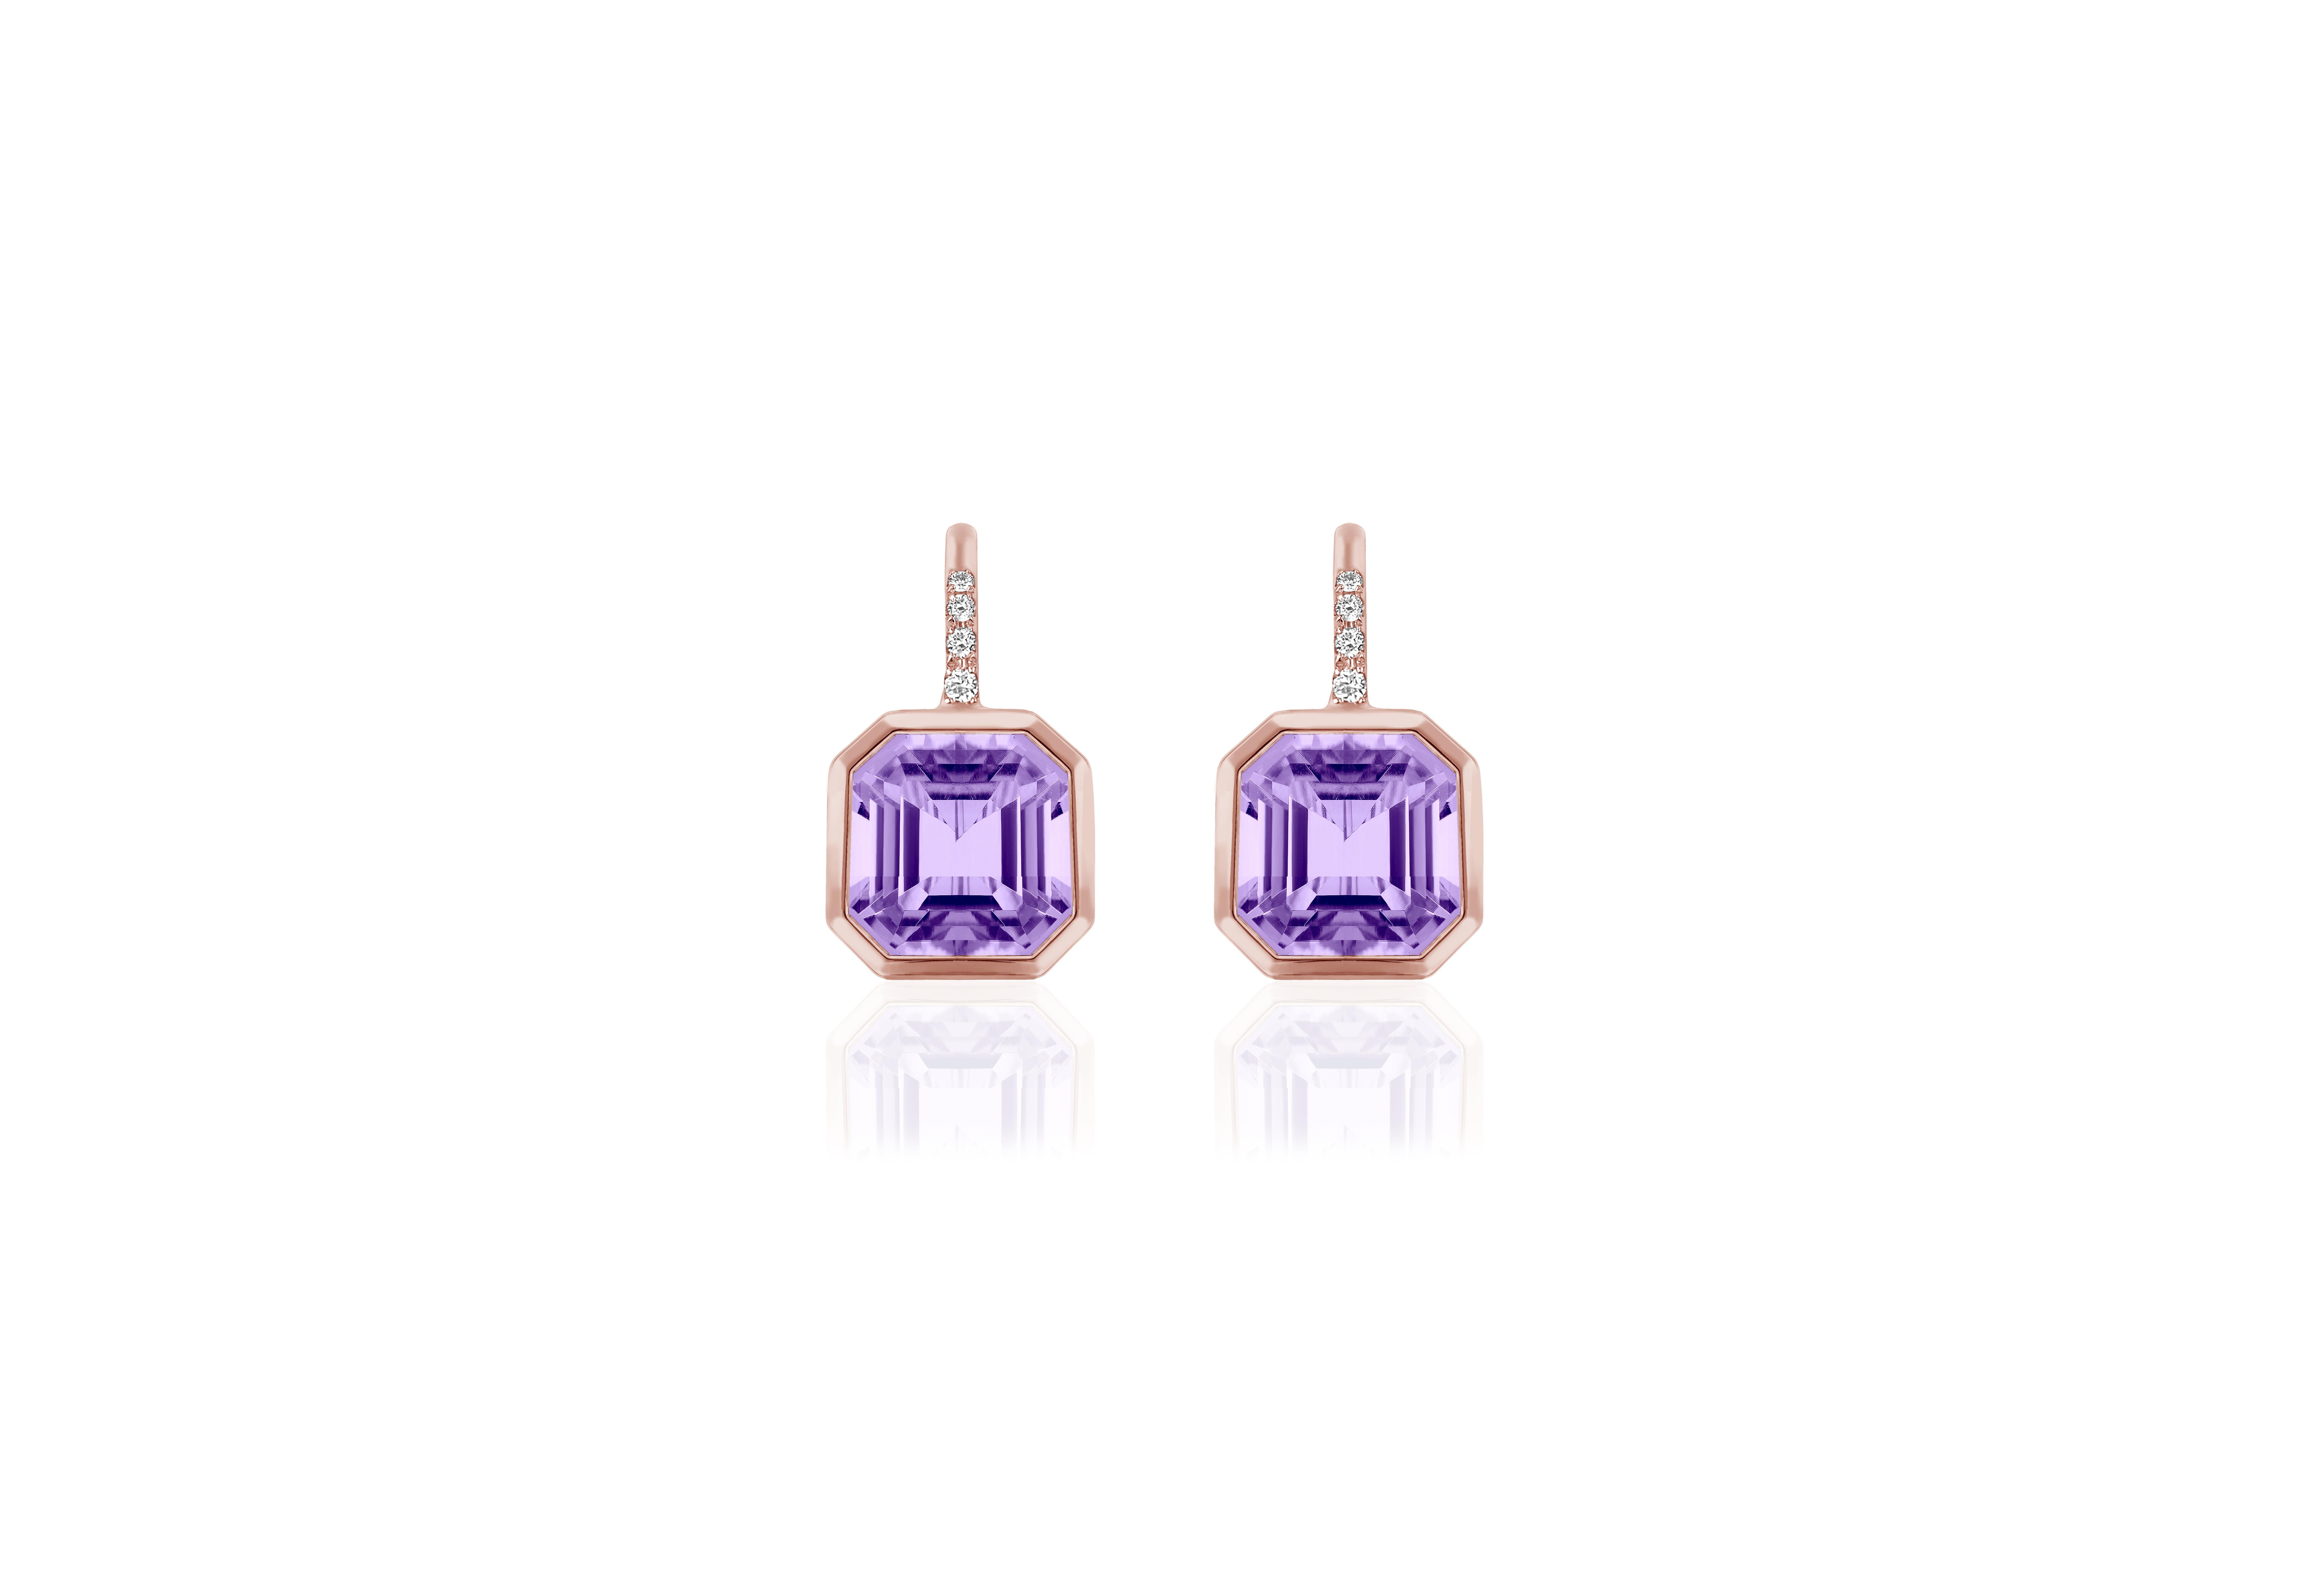 Elevate your style with these exquisite earrings featuring a stunning 9 x 9 mm Asscher-cut Lavender Amethyst gemstone. Expertly set on a delicate wire of 18K Gold, these earrings are adorned with four dazzling Diamonds, adding a touch of luxury and